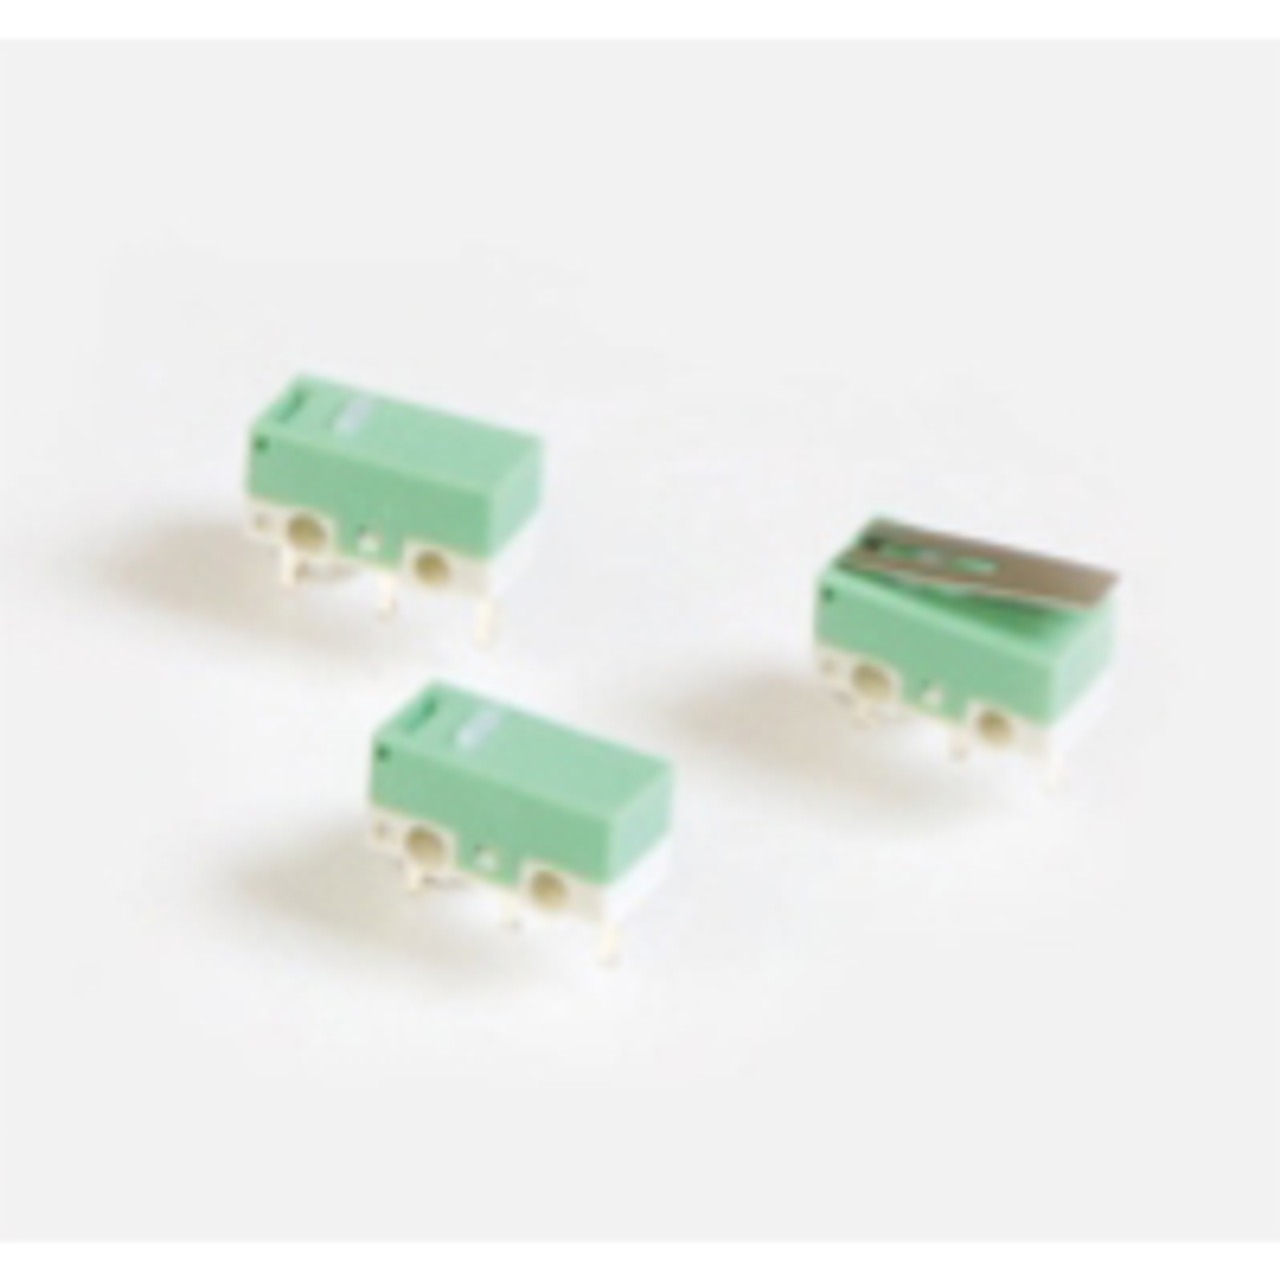 E-Switch DM0850301F015V1A Snap-Action Switches